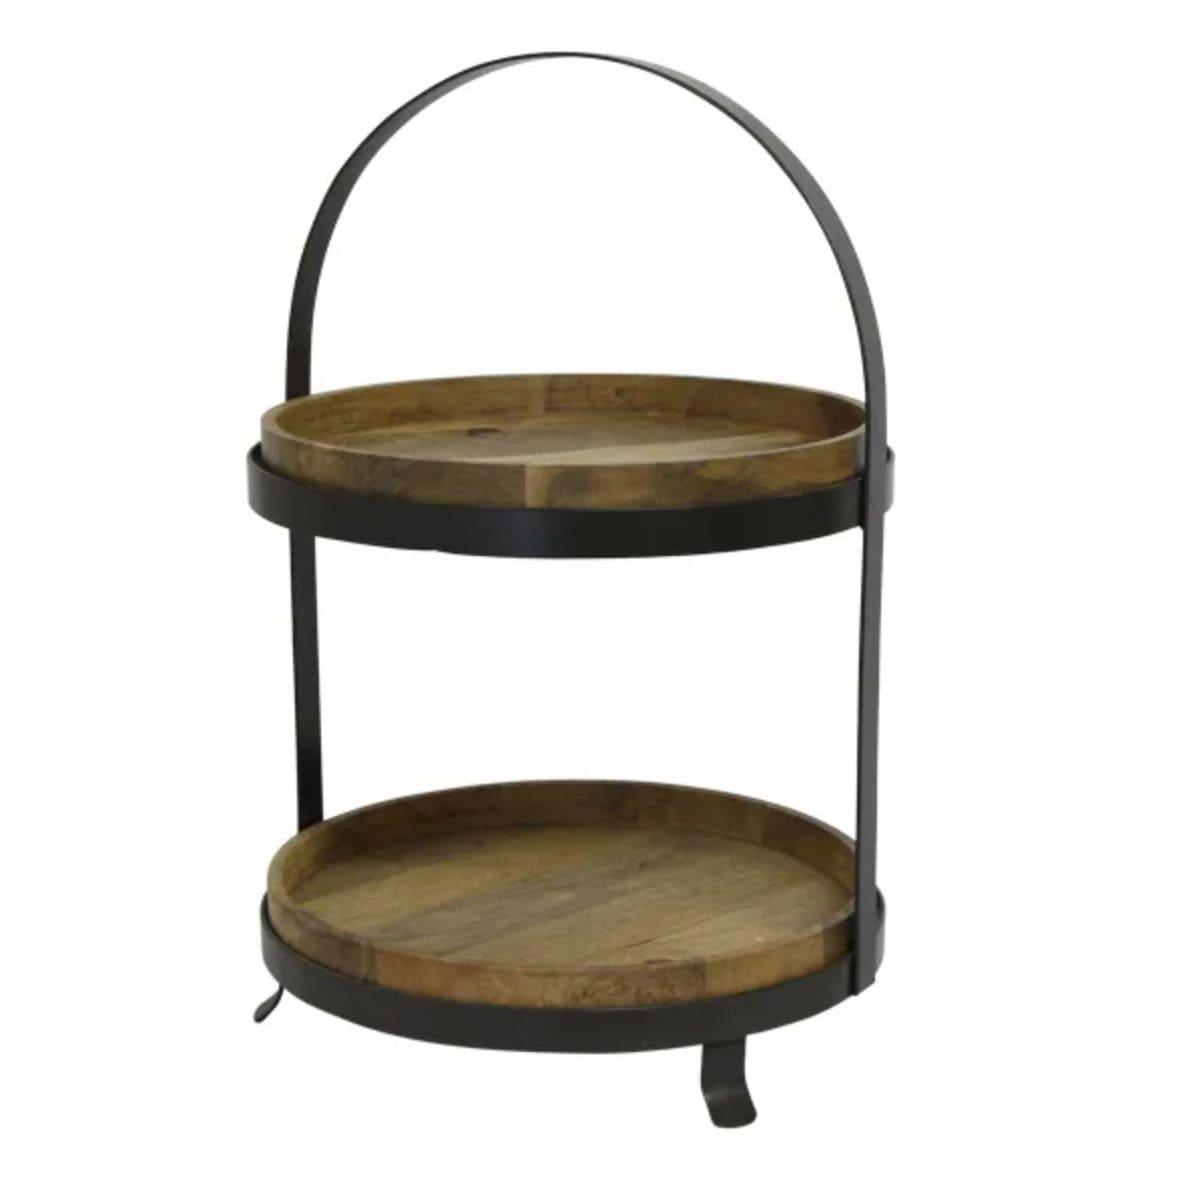 Ploughman's Cake Stand - Large 2 Tier House of Dudley